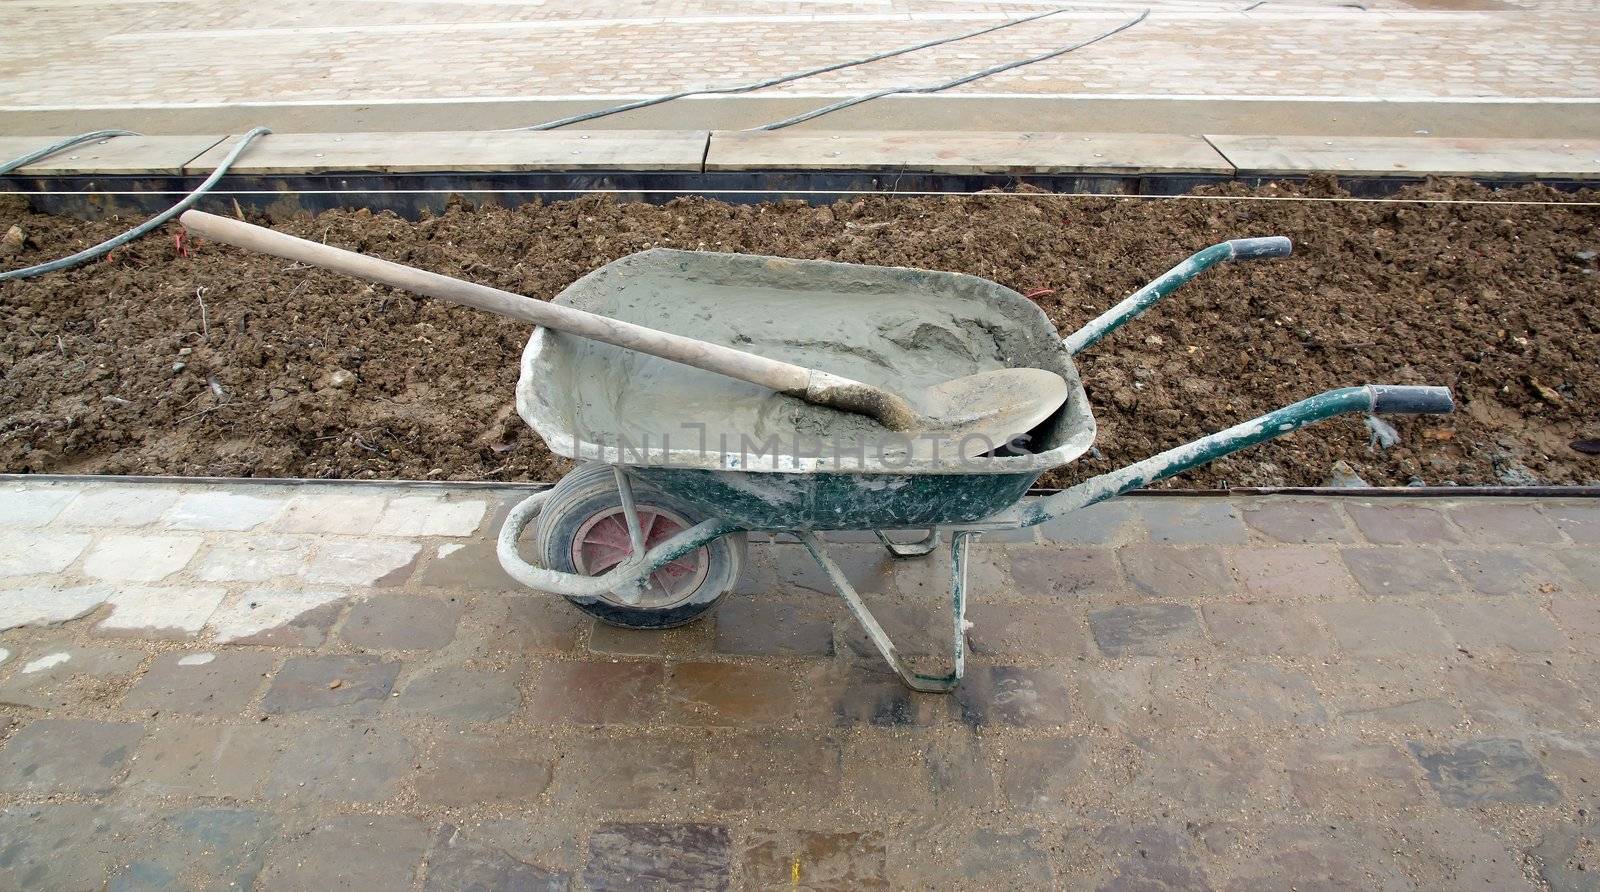 wheelbarrow filled with cement, construction site of public works by neko92vl